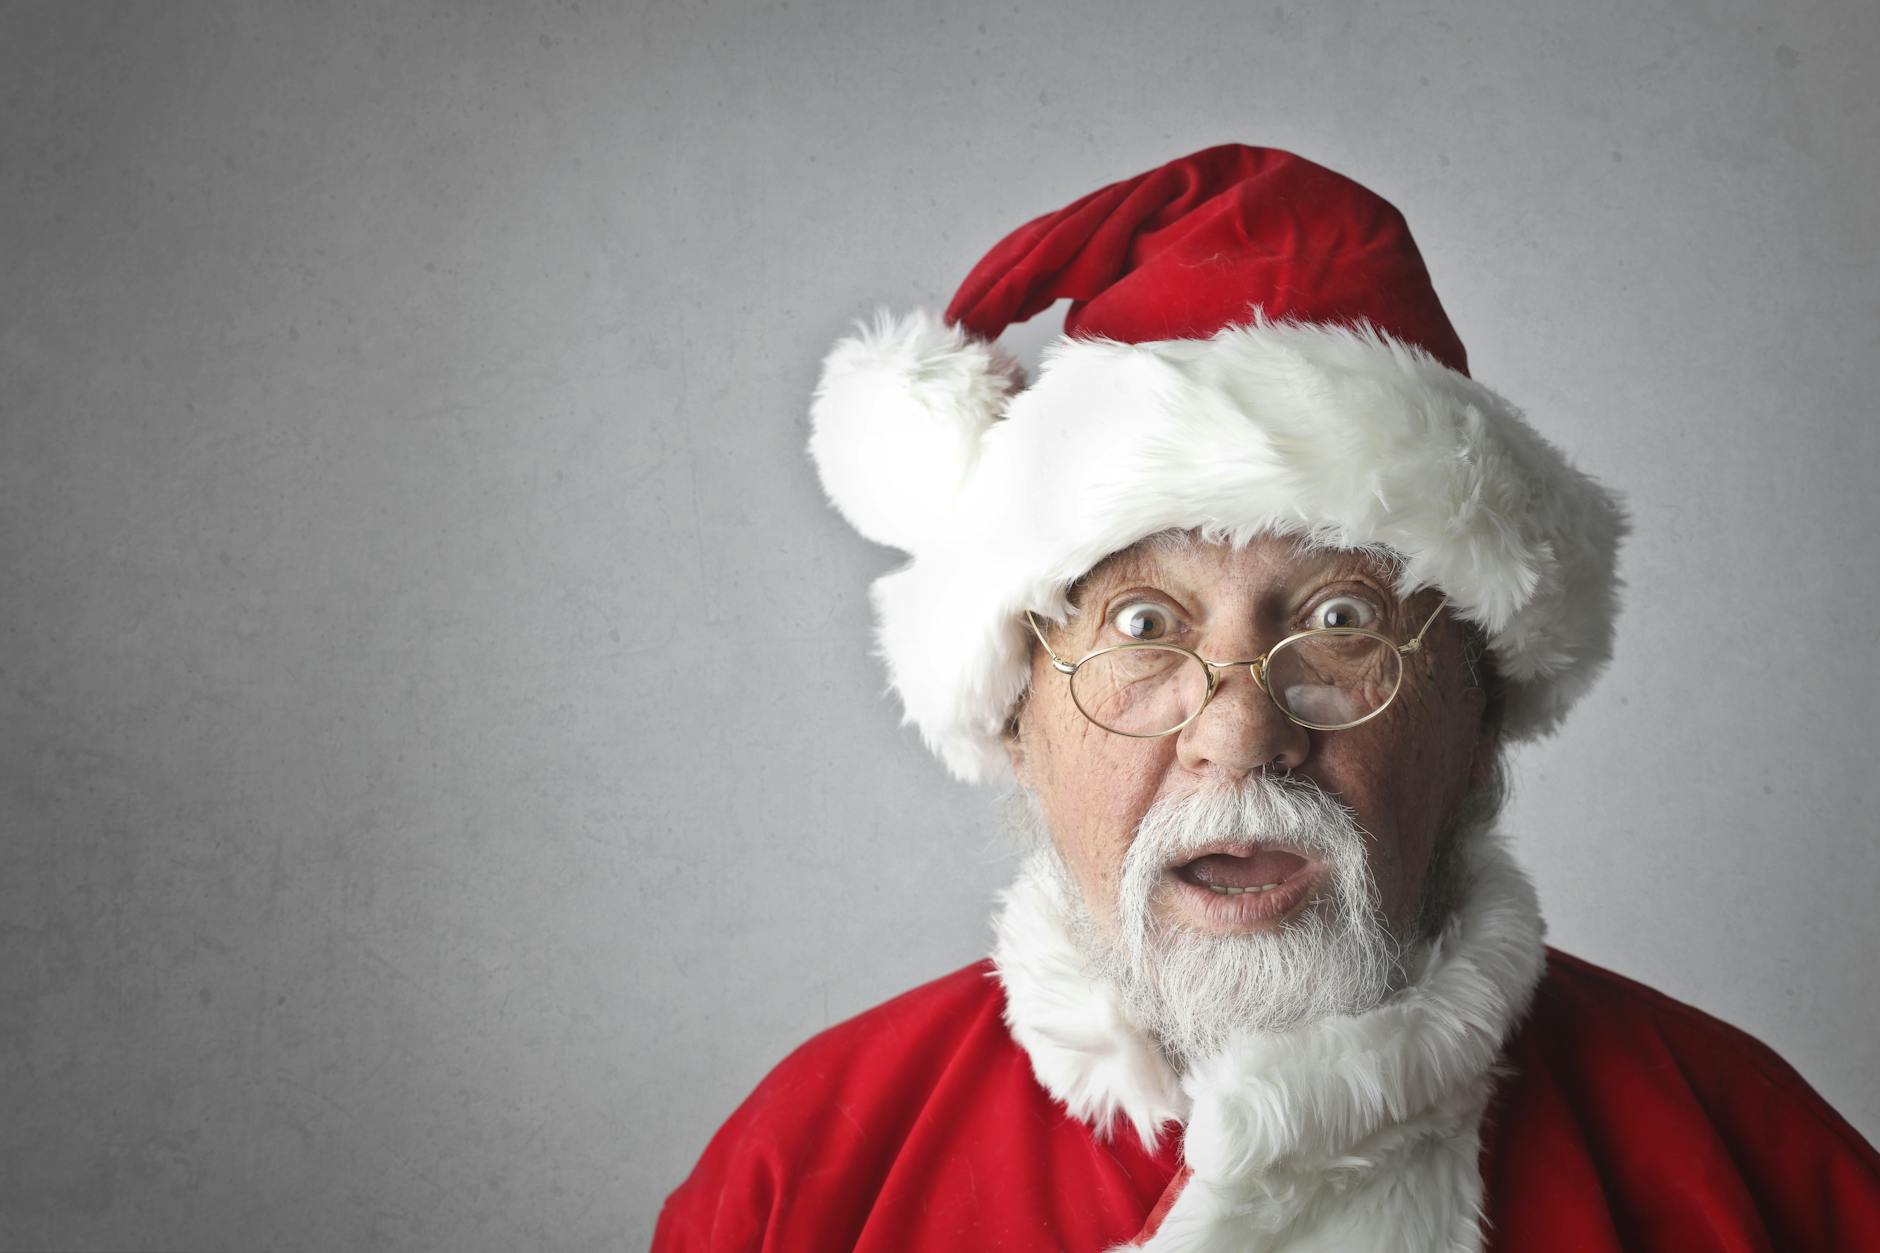 man in santa claus costume
Photo by bruce mars on Pexels.com